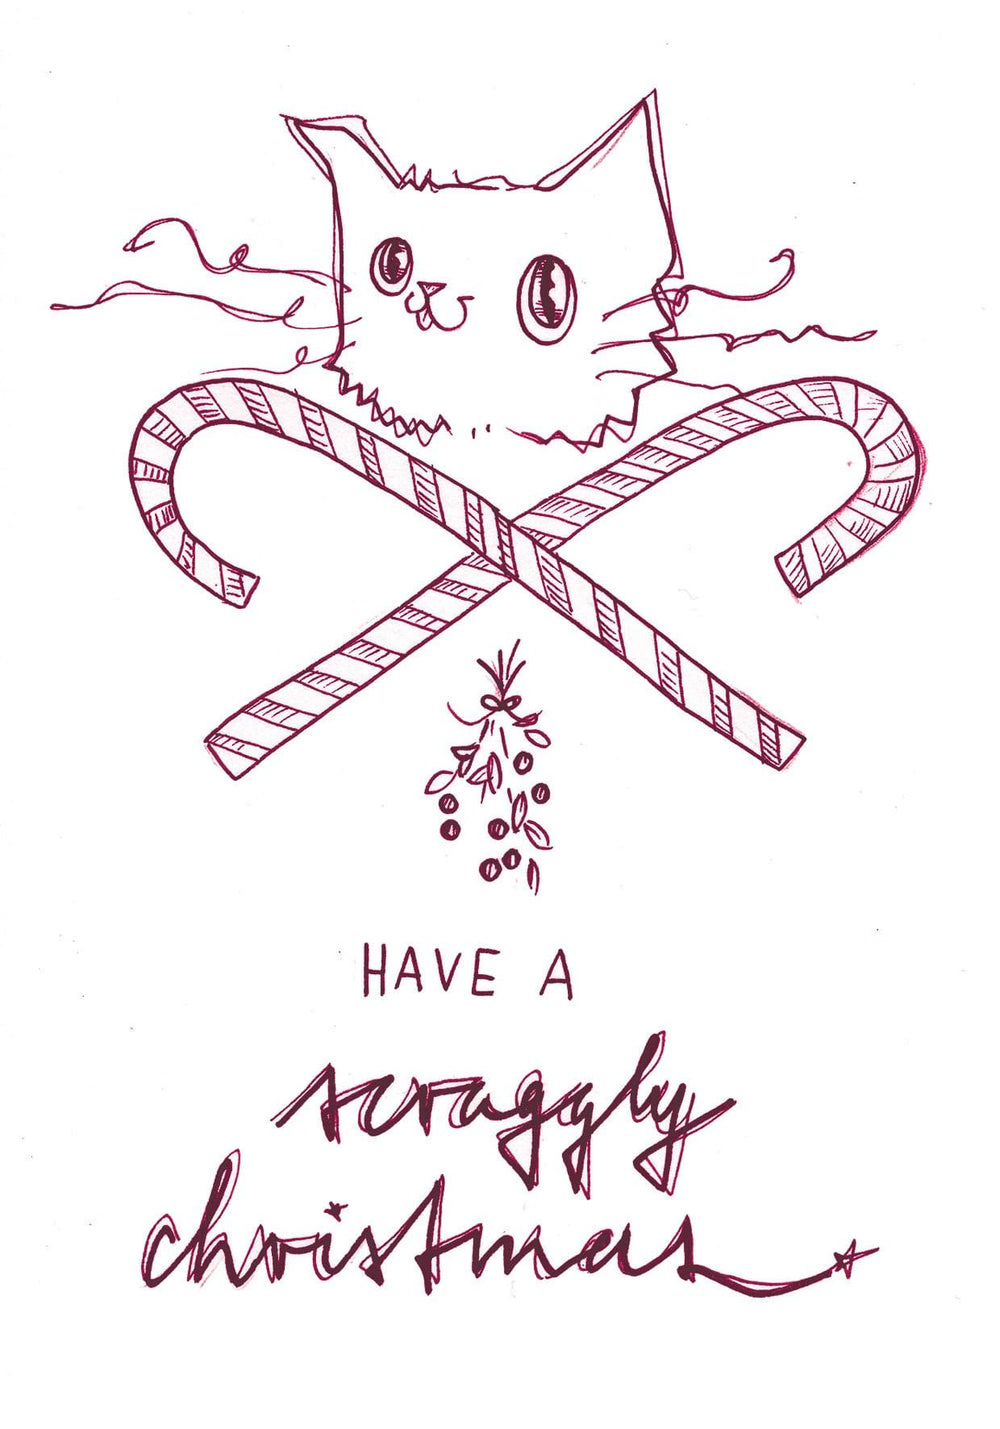 Have A Scraggly Christmas Greeting Card Scraggly Kitty Greeting Cards Card